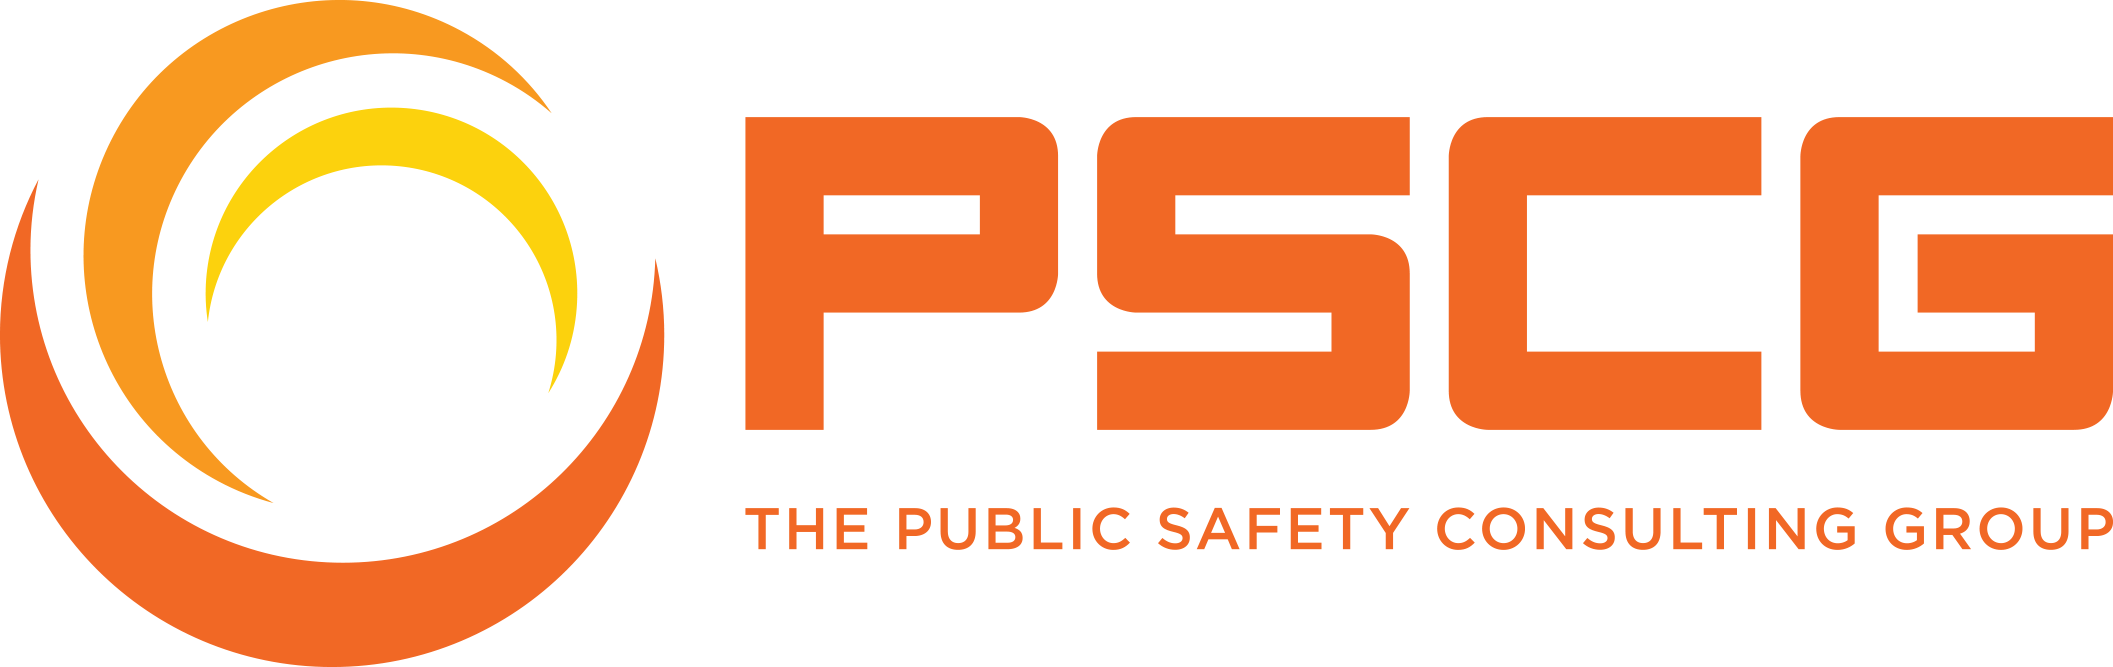 The Public Safety Consulting Group